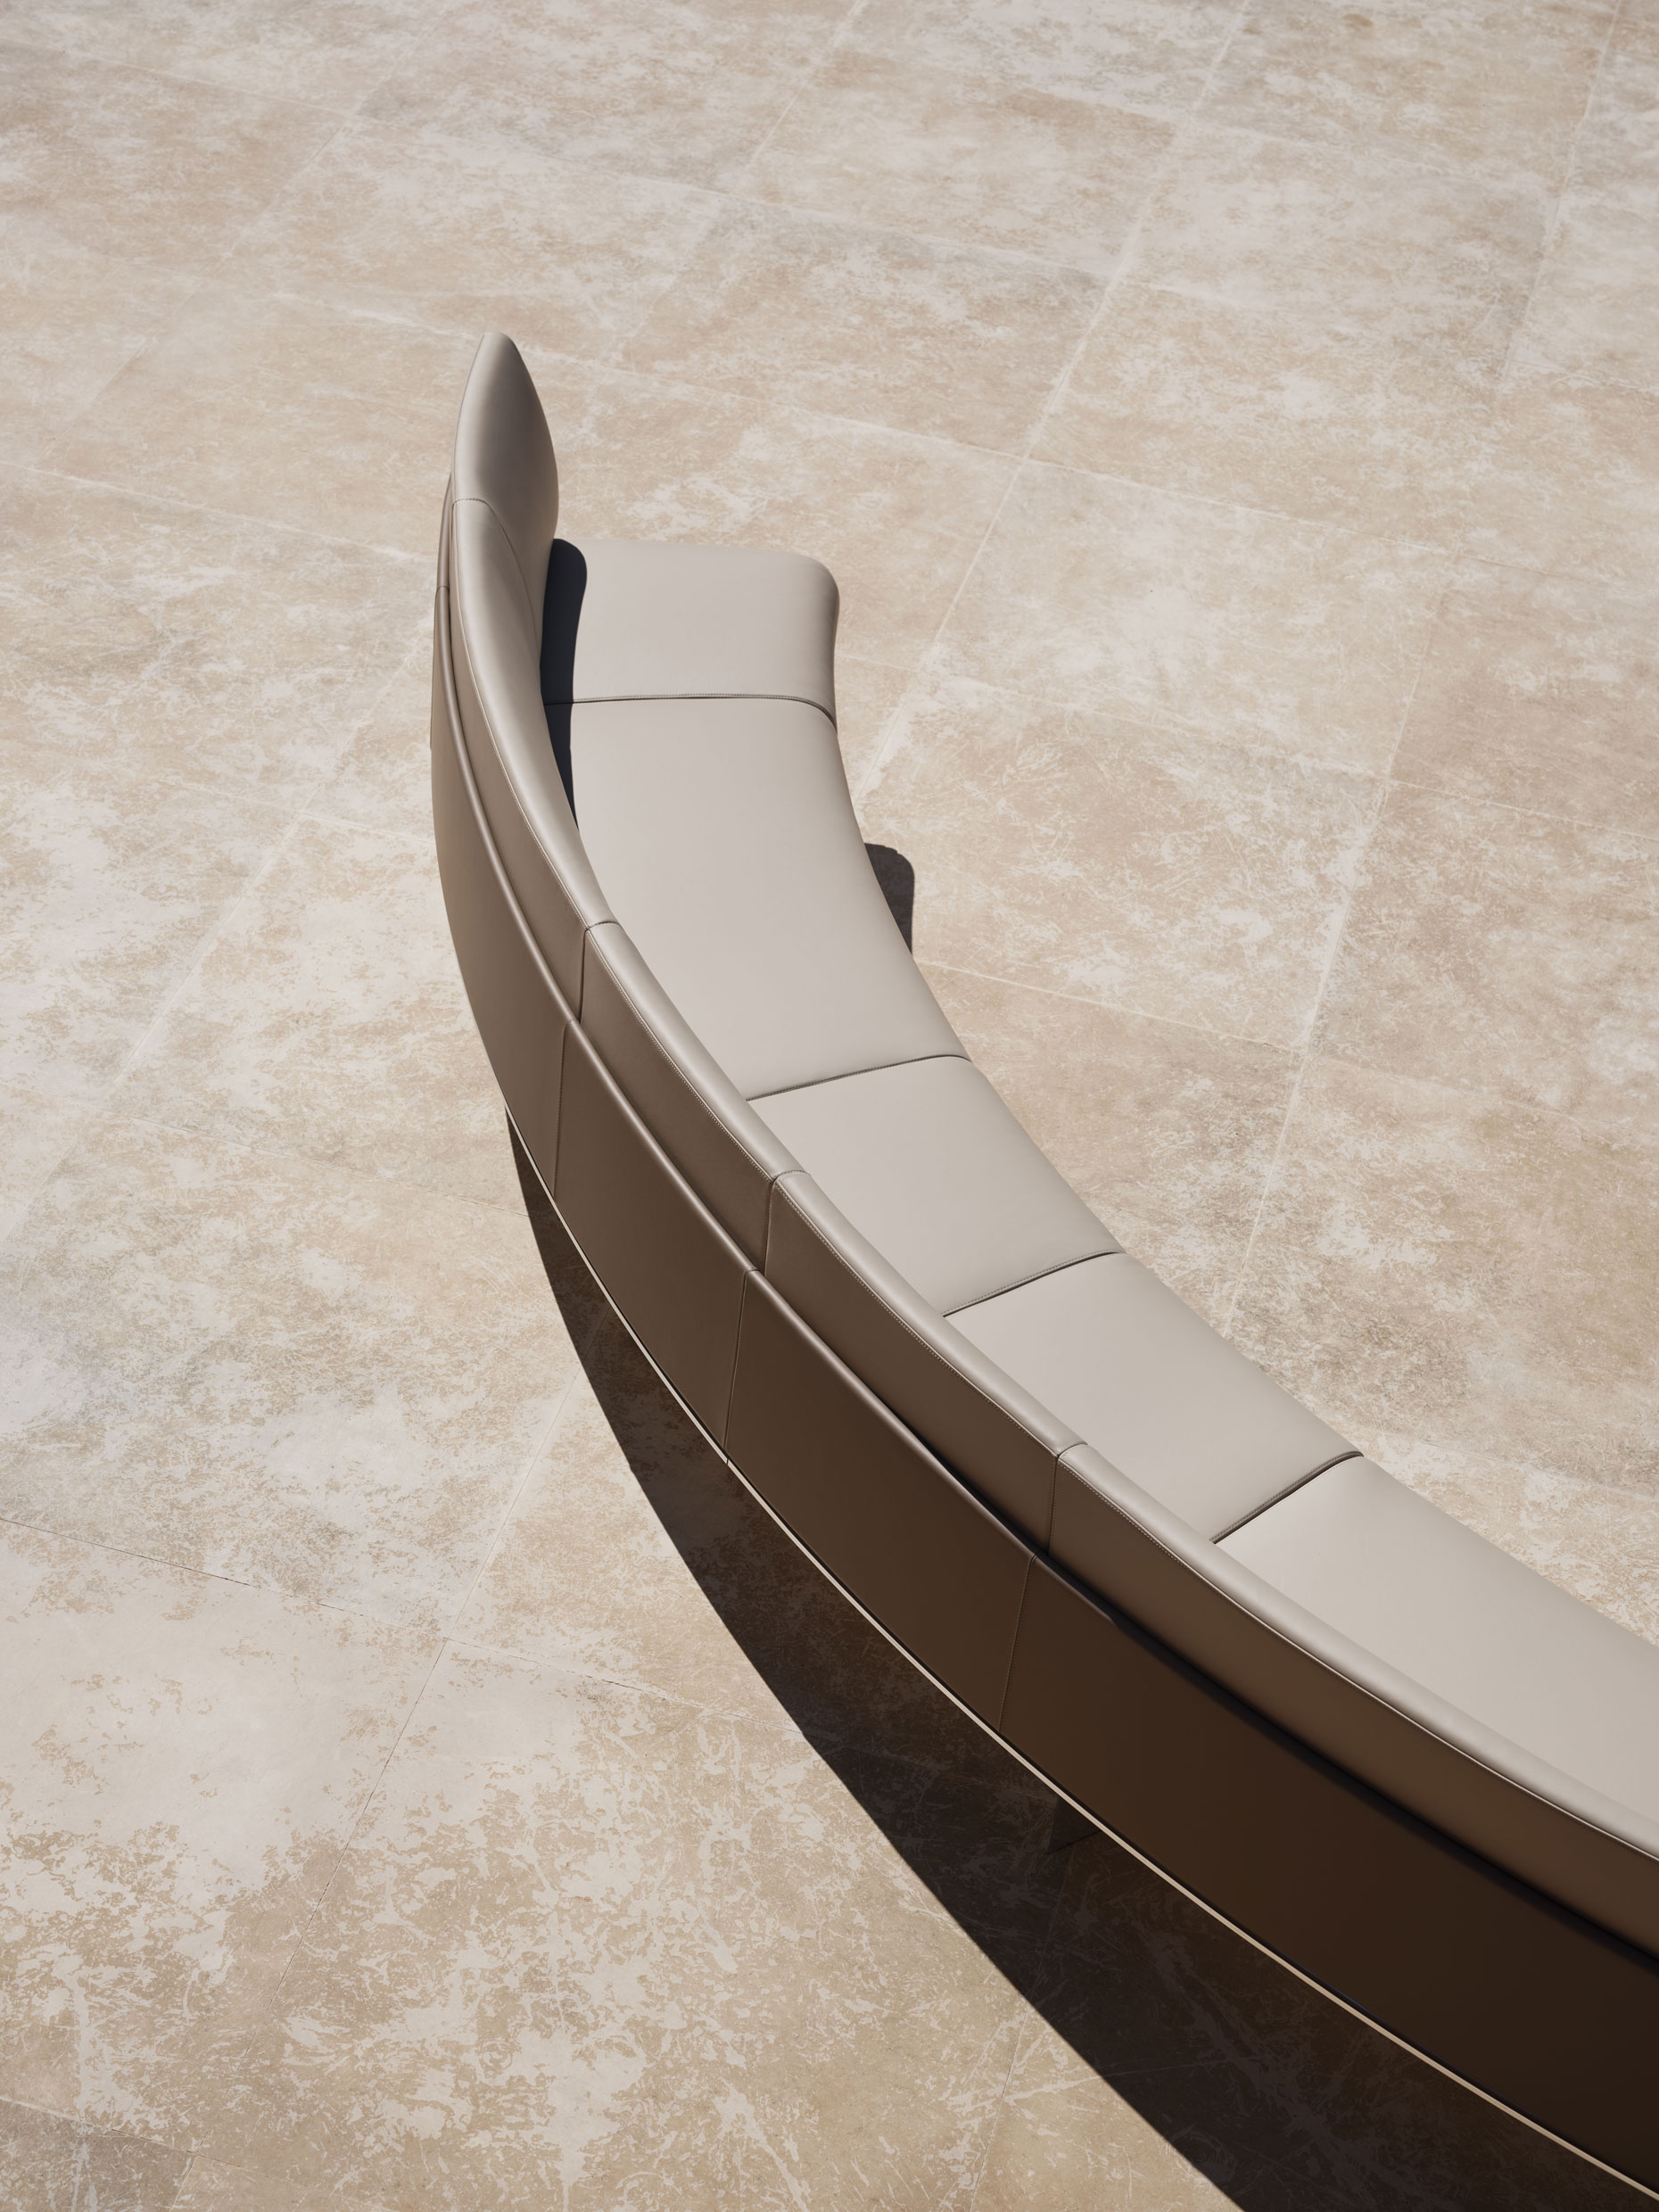 Detail of the joining of two modules of the curved sofa – ph. Alberto Strada